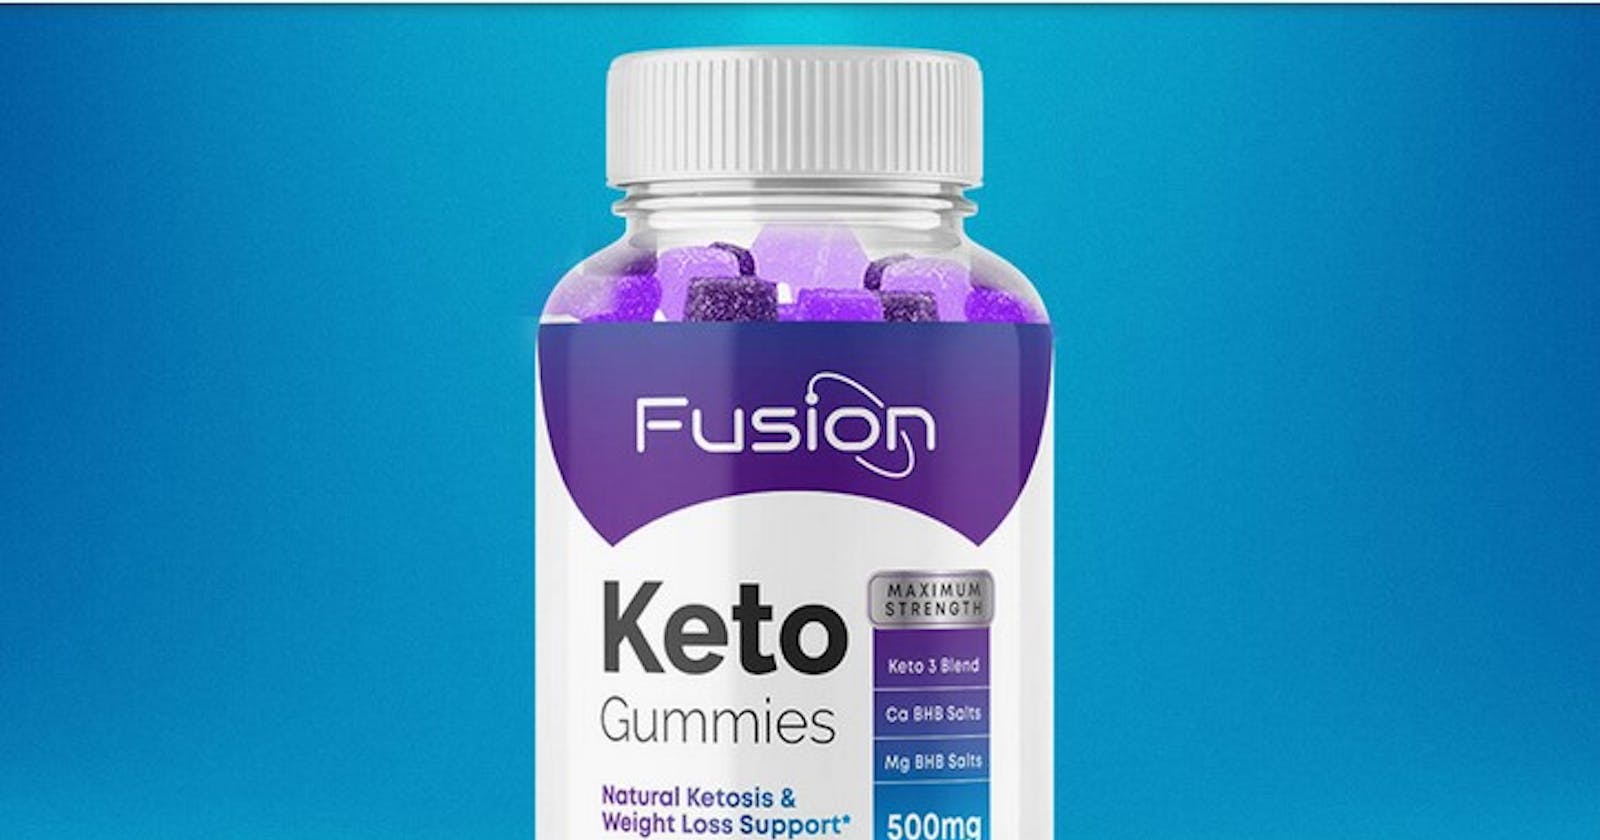 Keto Fusion Sugar Free Gummies Reviews All You Need To Know About Keto Fusion Gummies Offer!